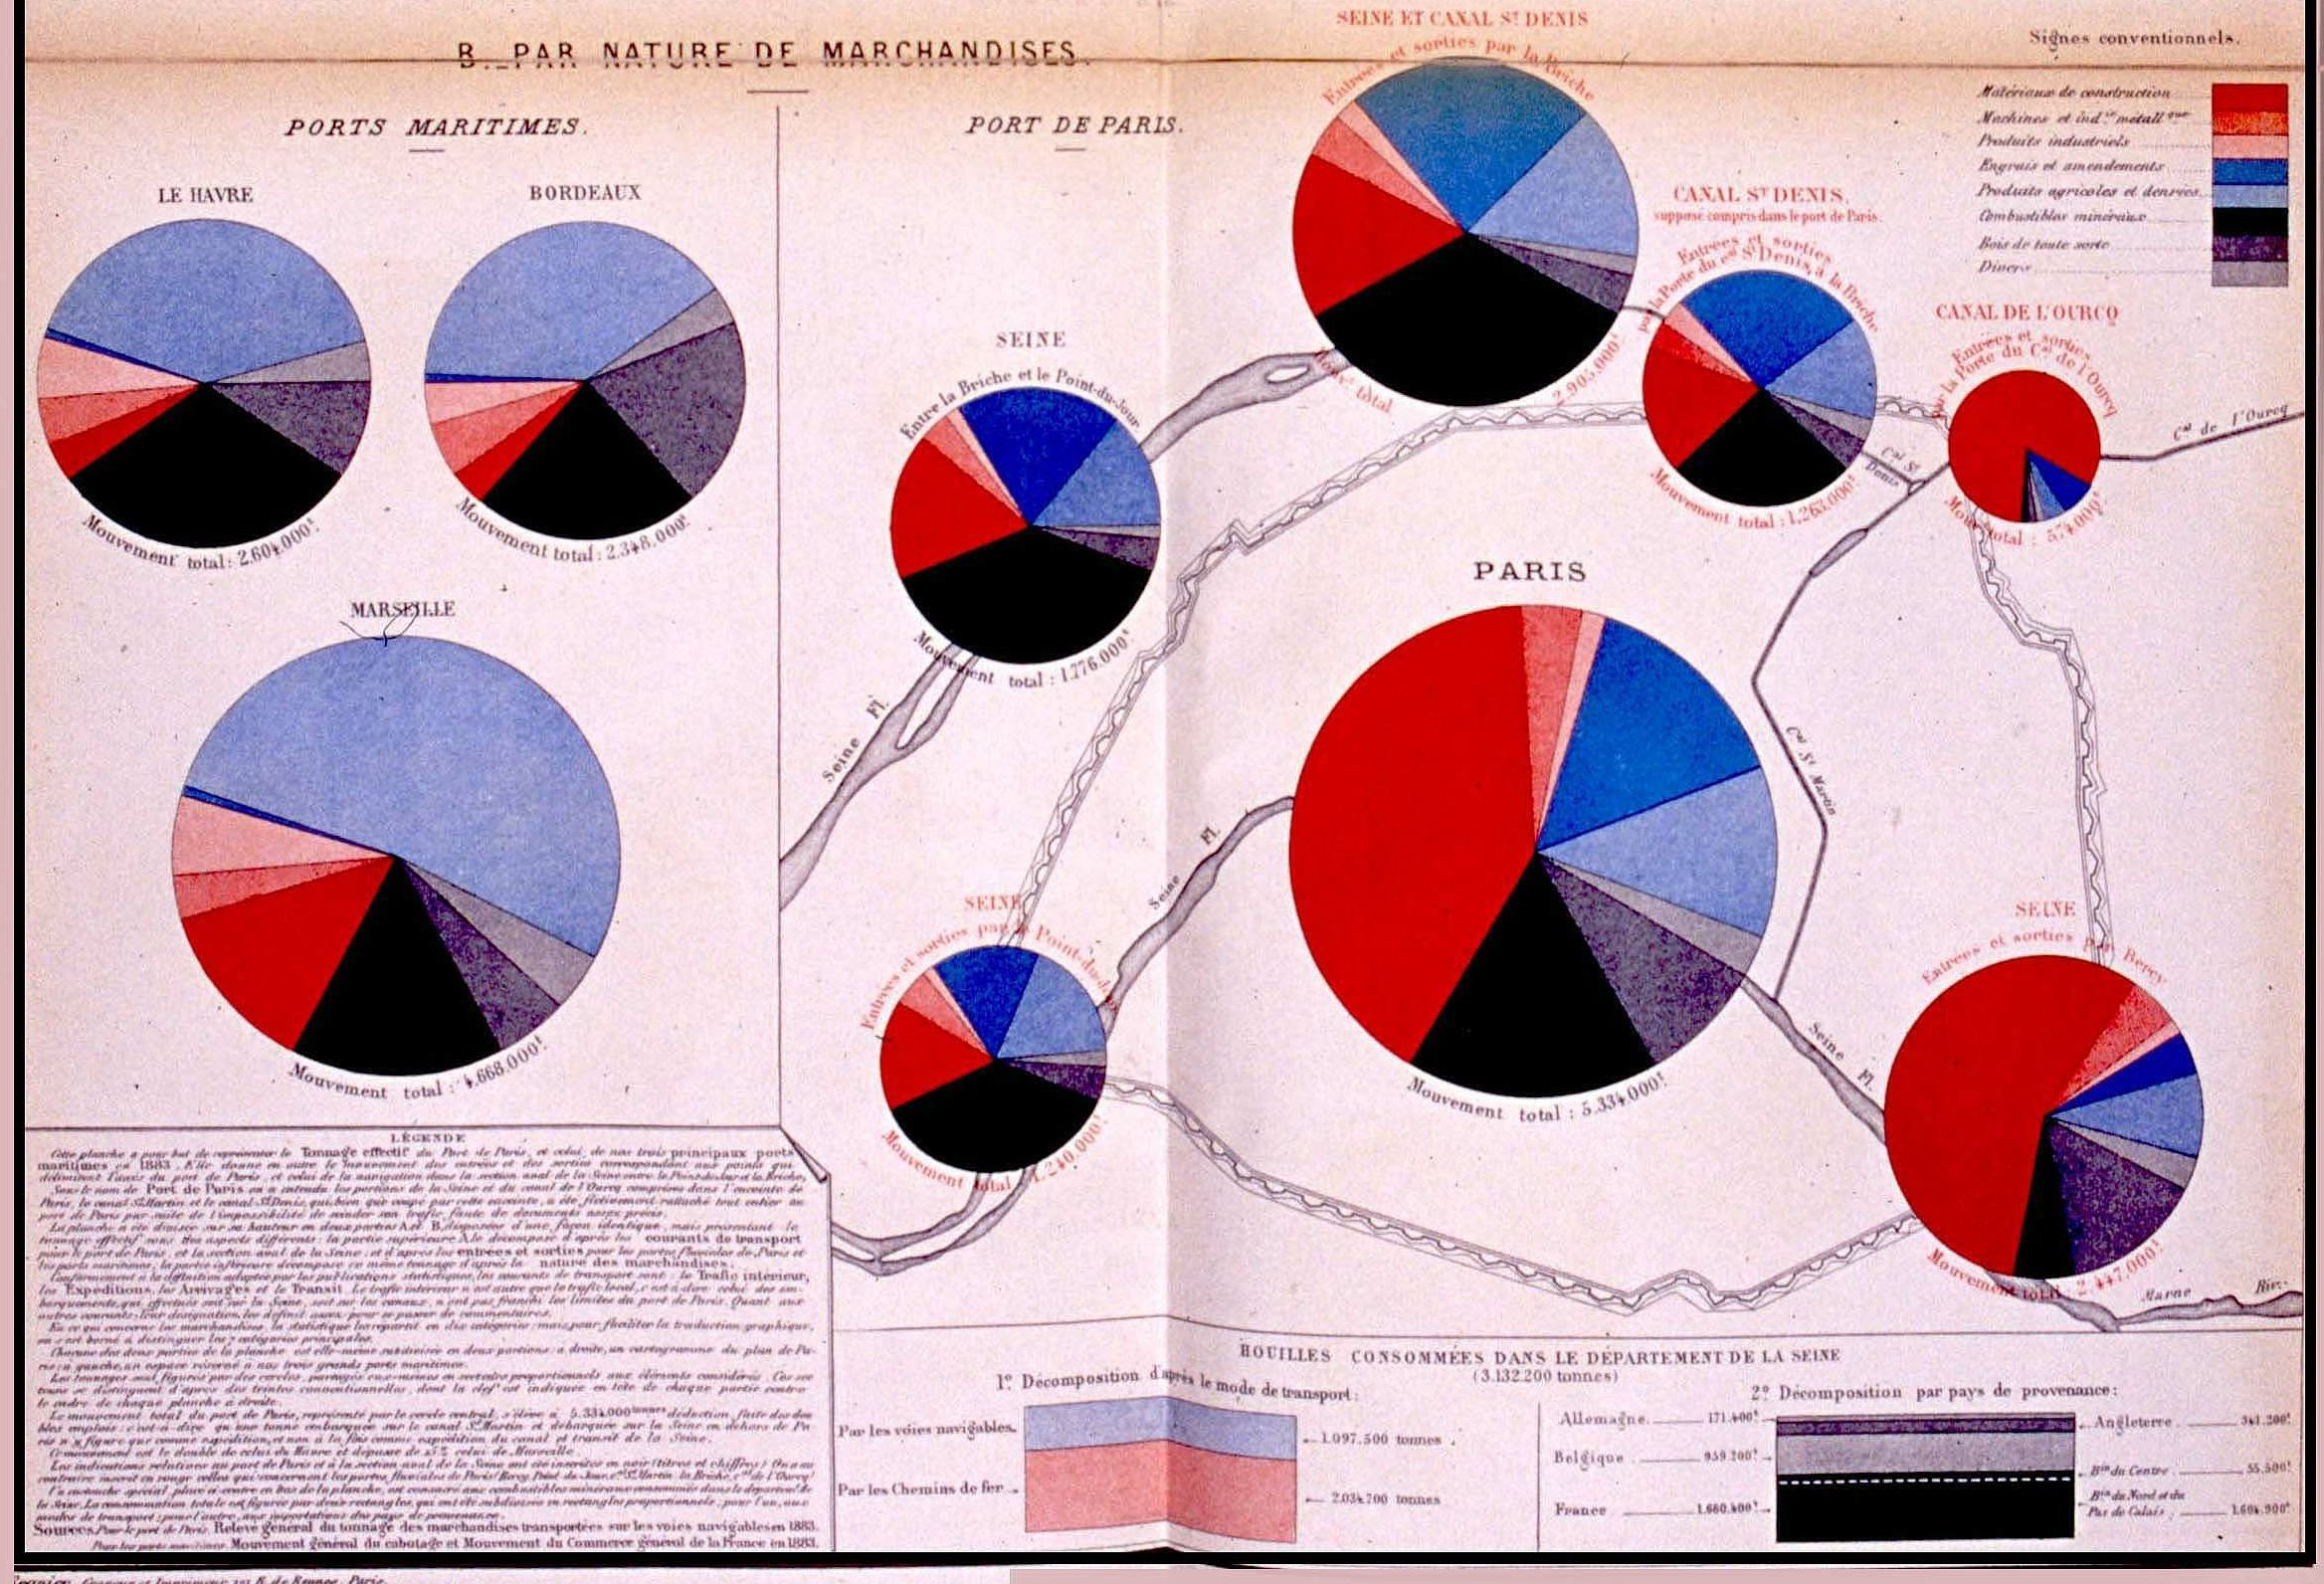 Pie map of Paris transport: Bottom portion of Plate 17 from the Album de Statistique Graphique of 1885, showing transport of goods to the ports of Paris and the principal maritime ports in 1883.